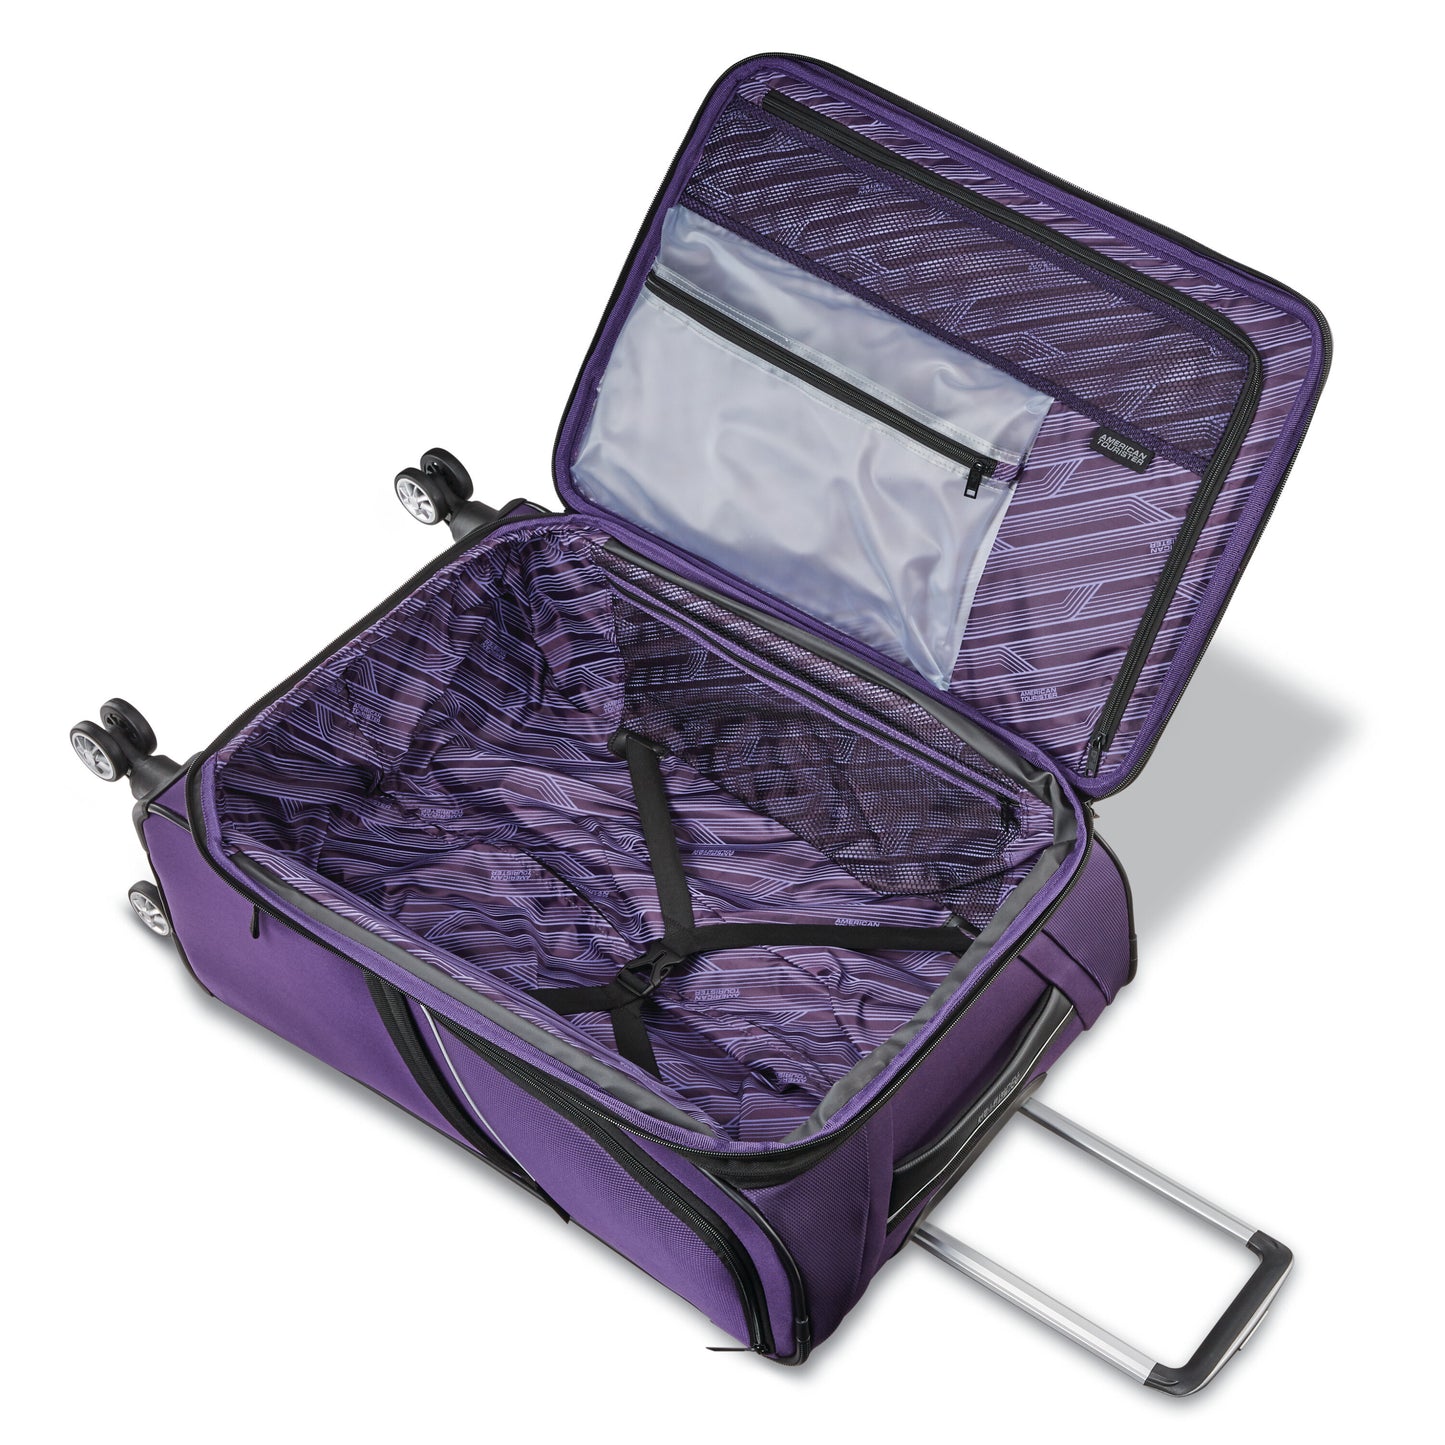 American Tourister Zoom Turbo 28" Spinner